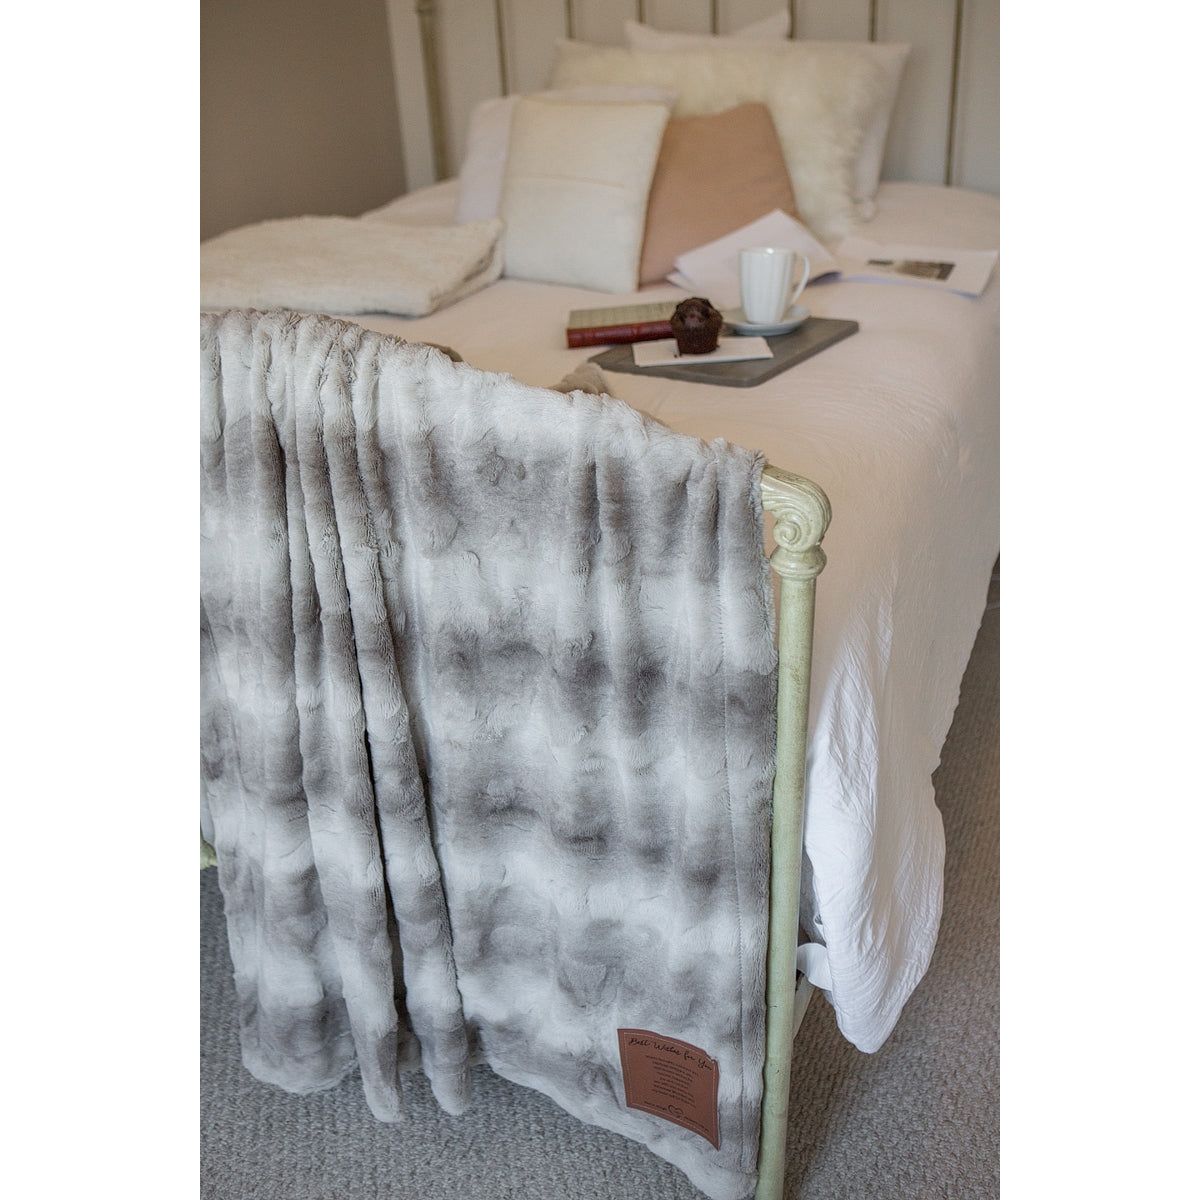 Always with You blanket draped over a footboard showing the soft texture and the varying shades of gray.